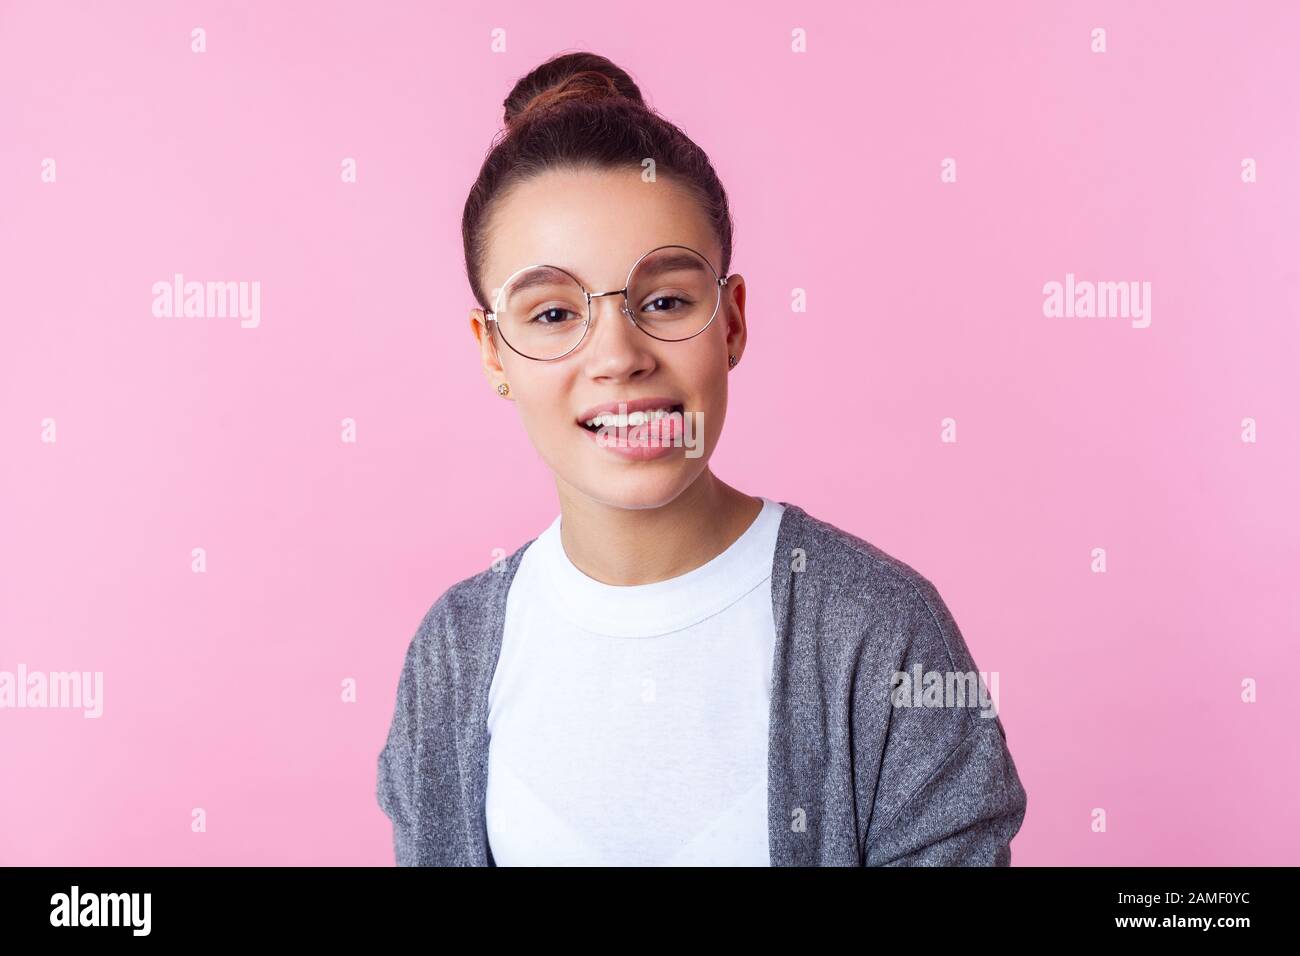 Young Cute Asian Nerd Girl Wearing Eyeglasses Stock Photo  Image of  female background 126763834